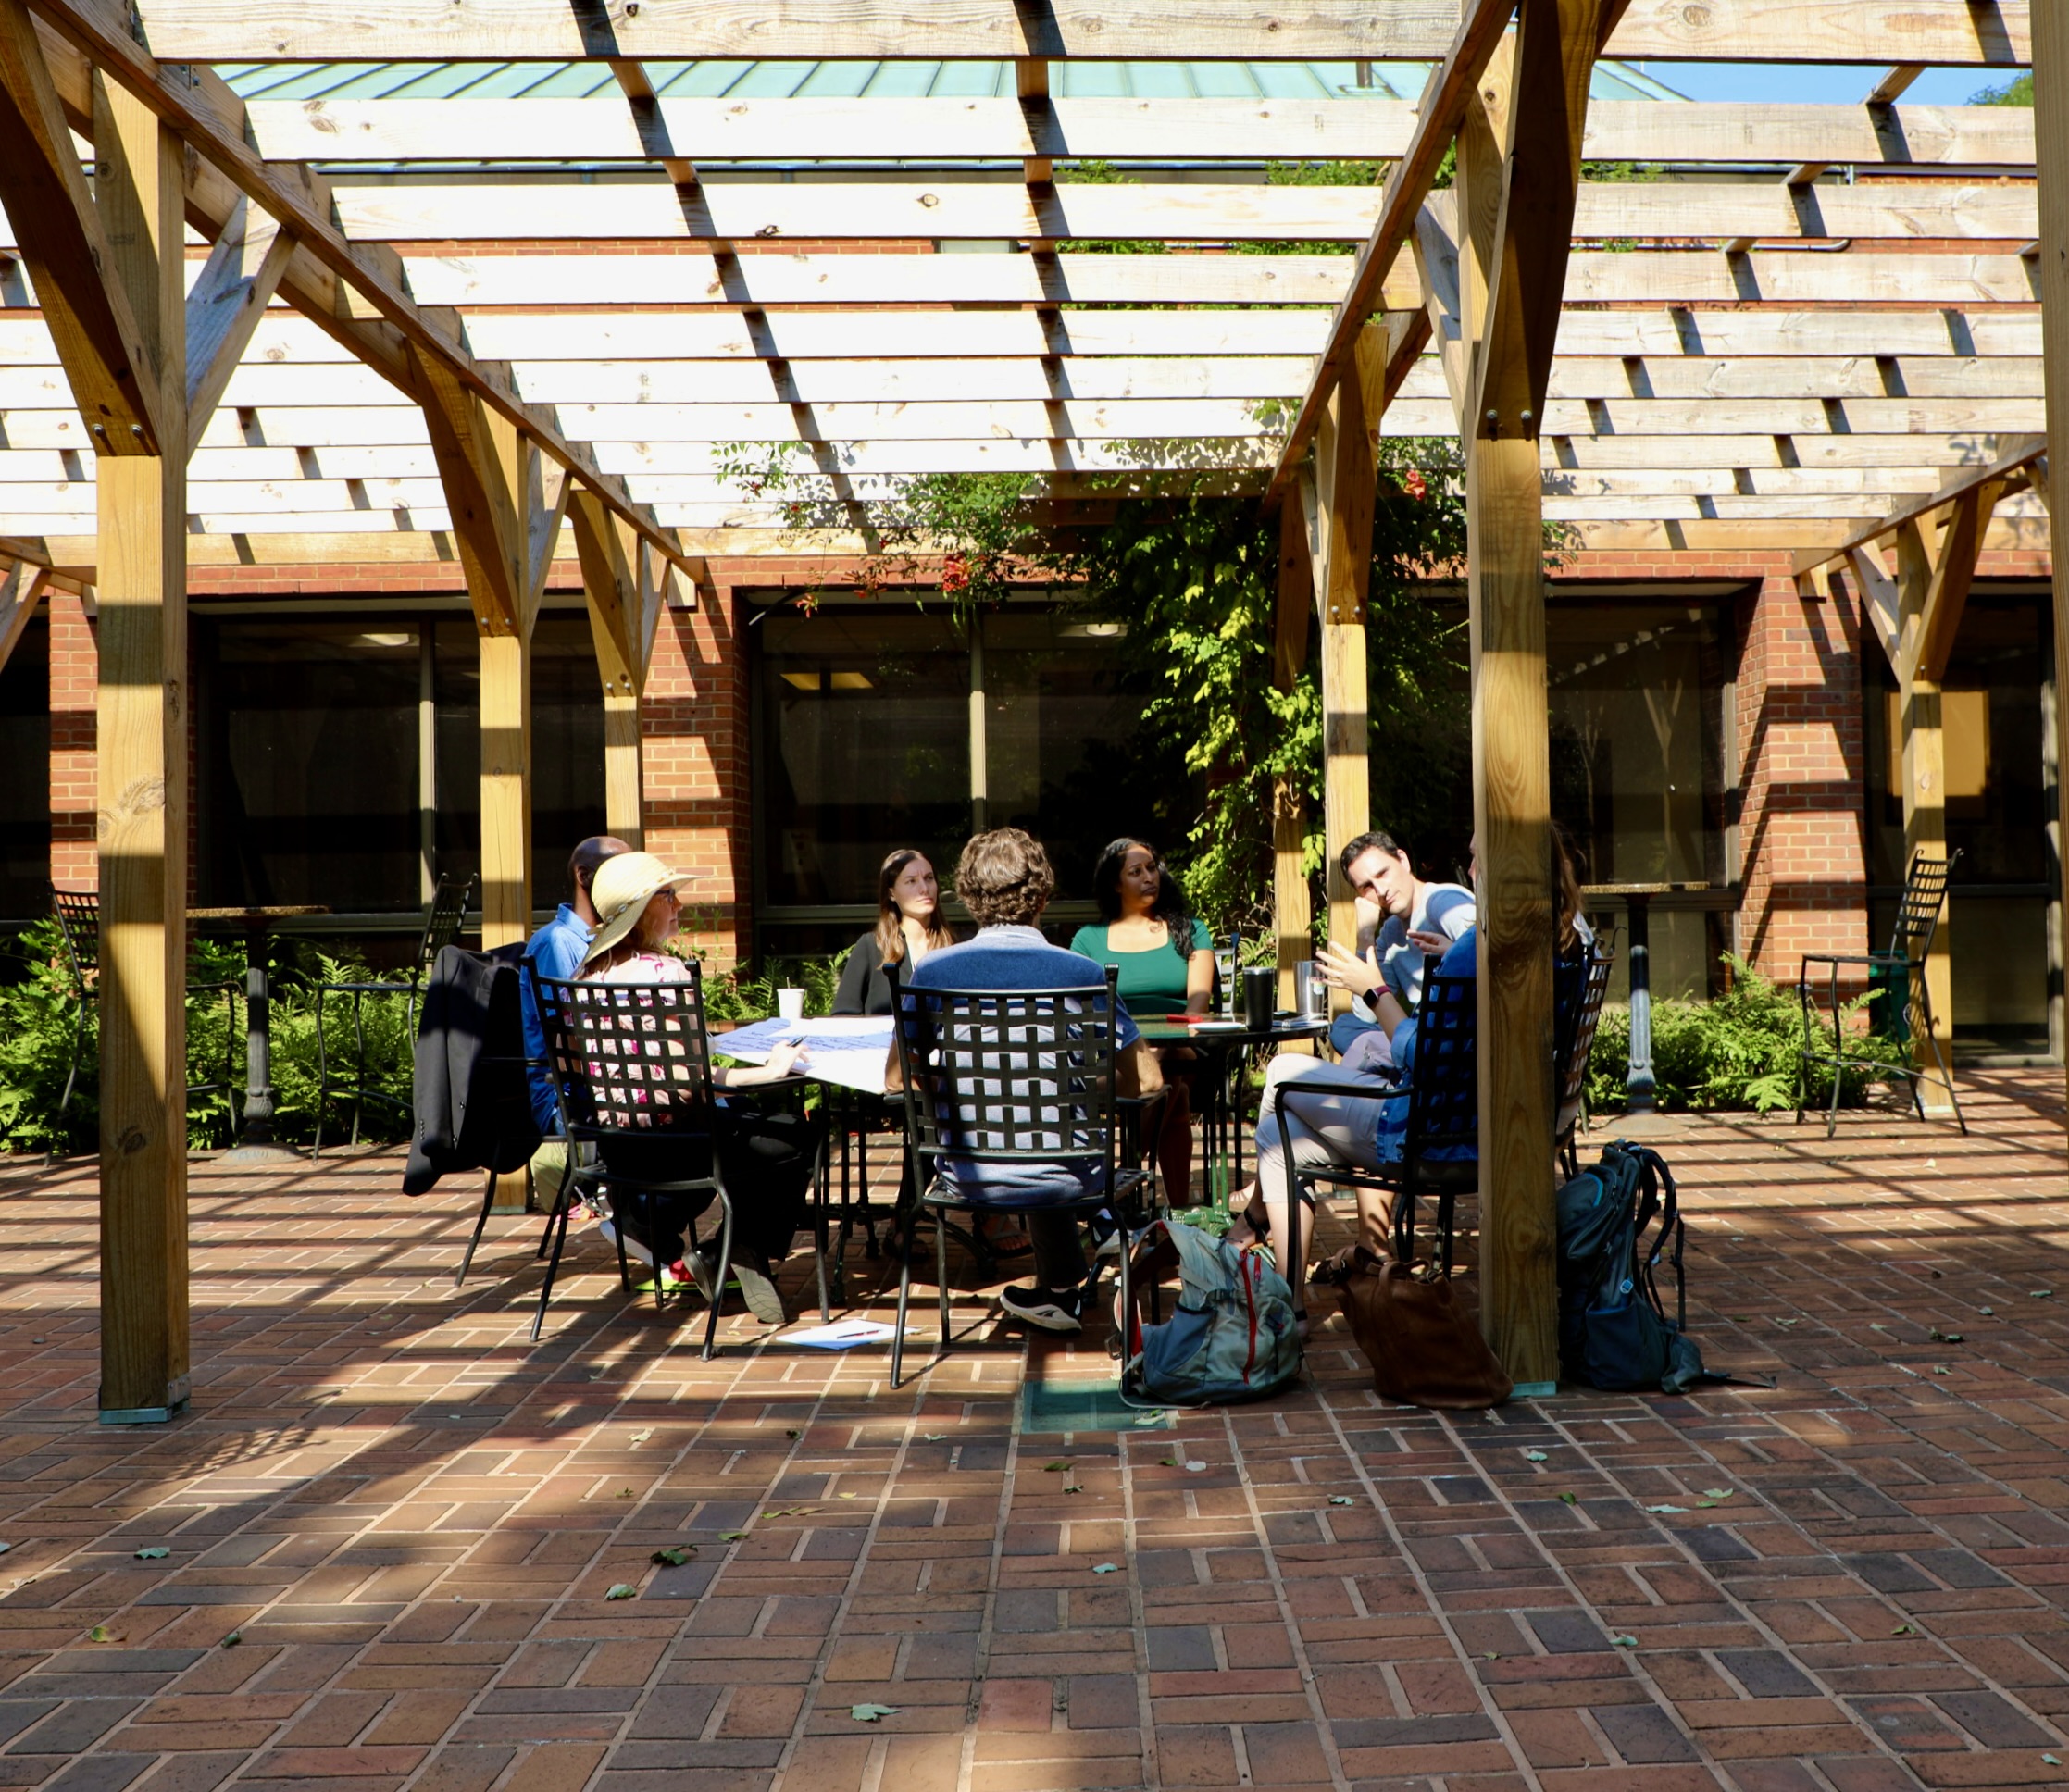 A group confers in a sunny courtyard.